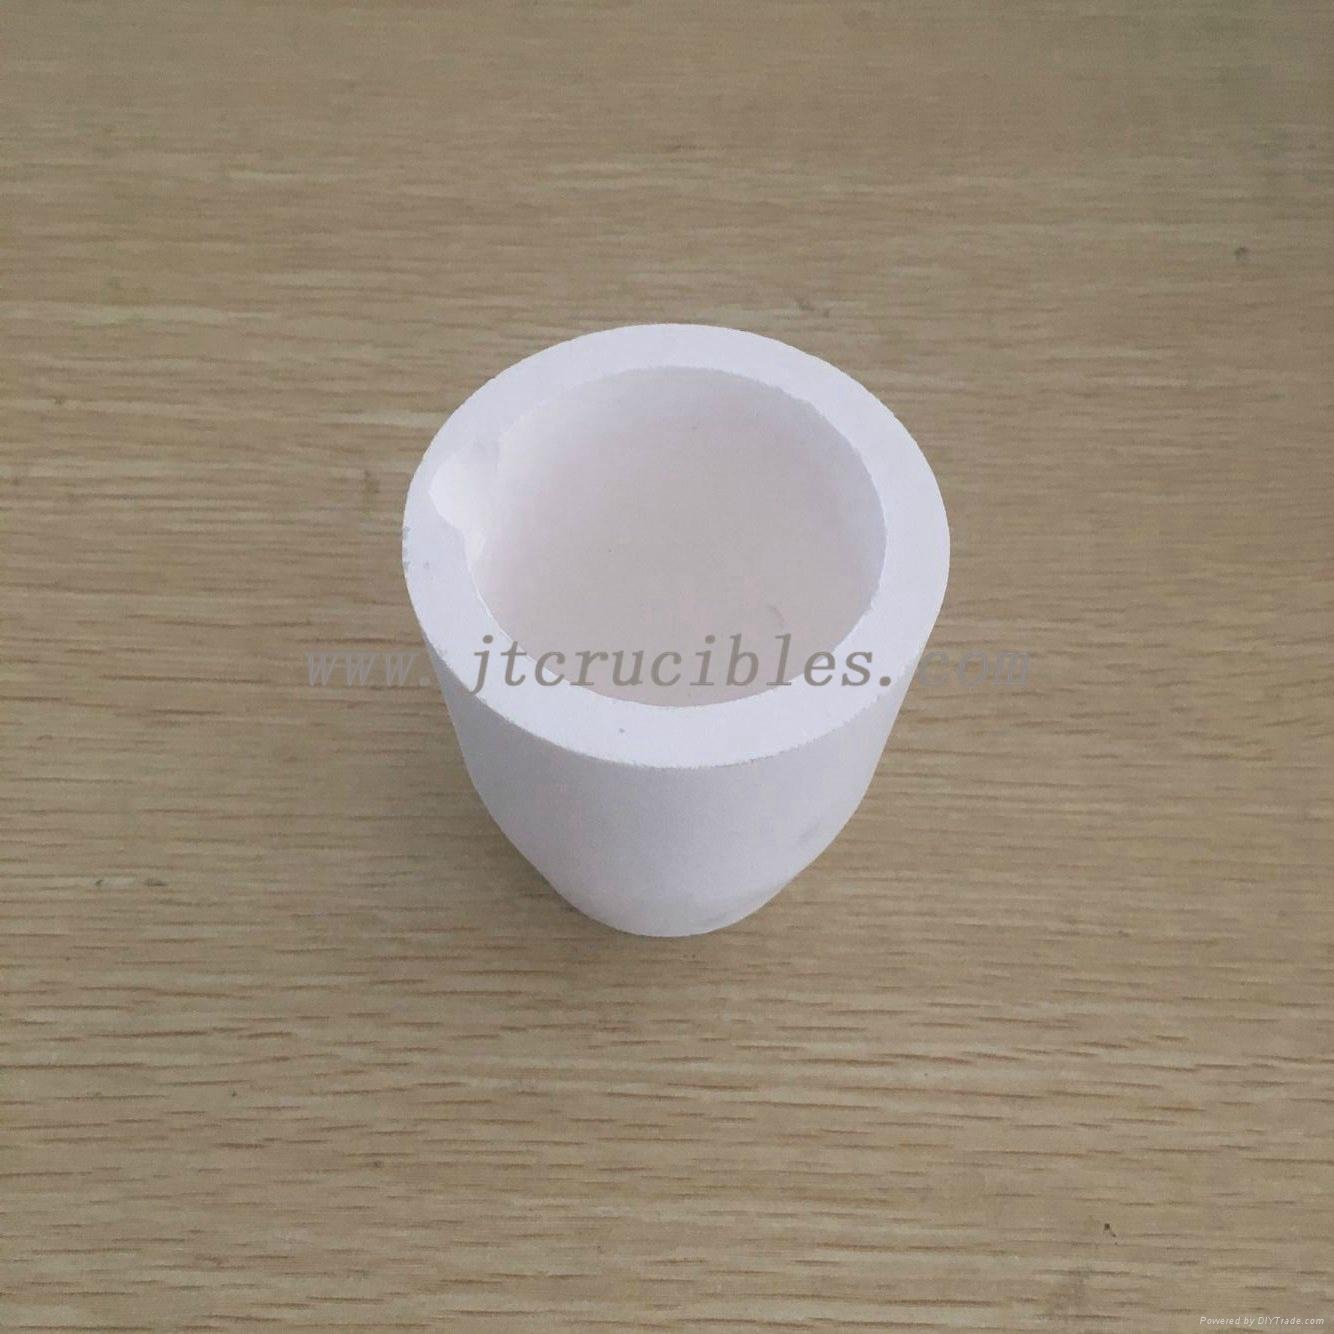 China factory wholesale fused silica jewelry casting crucibles 2